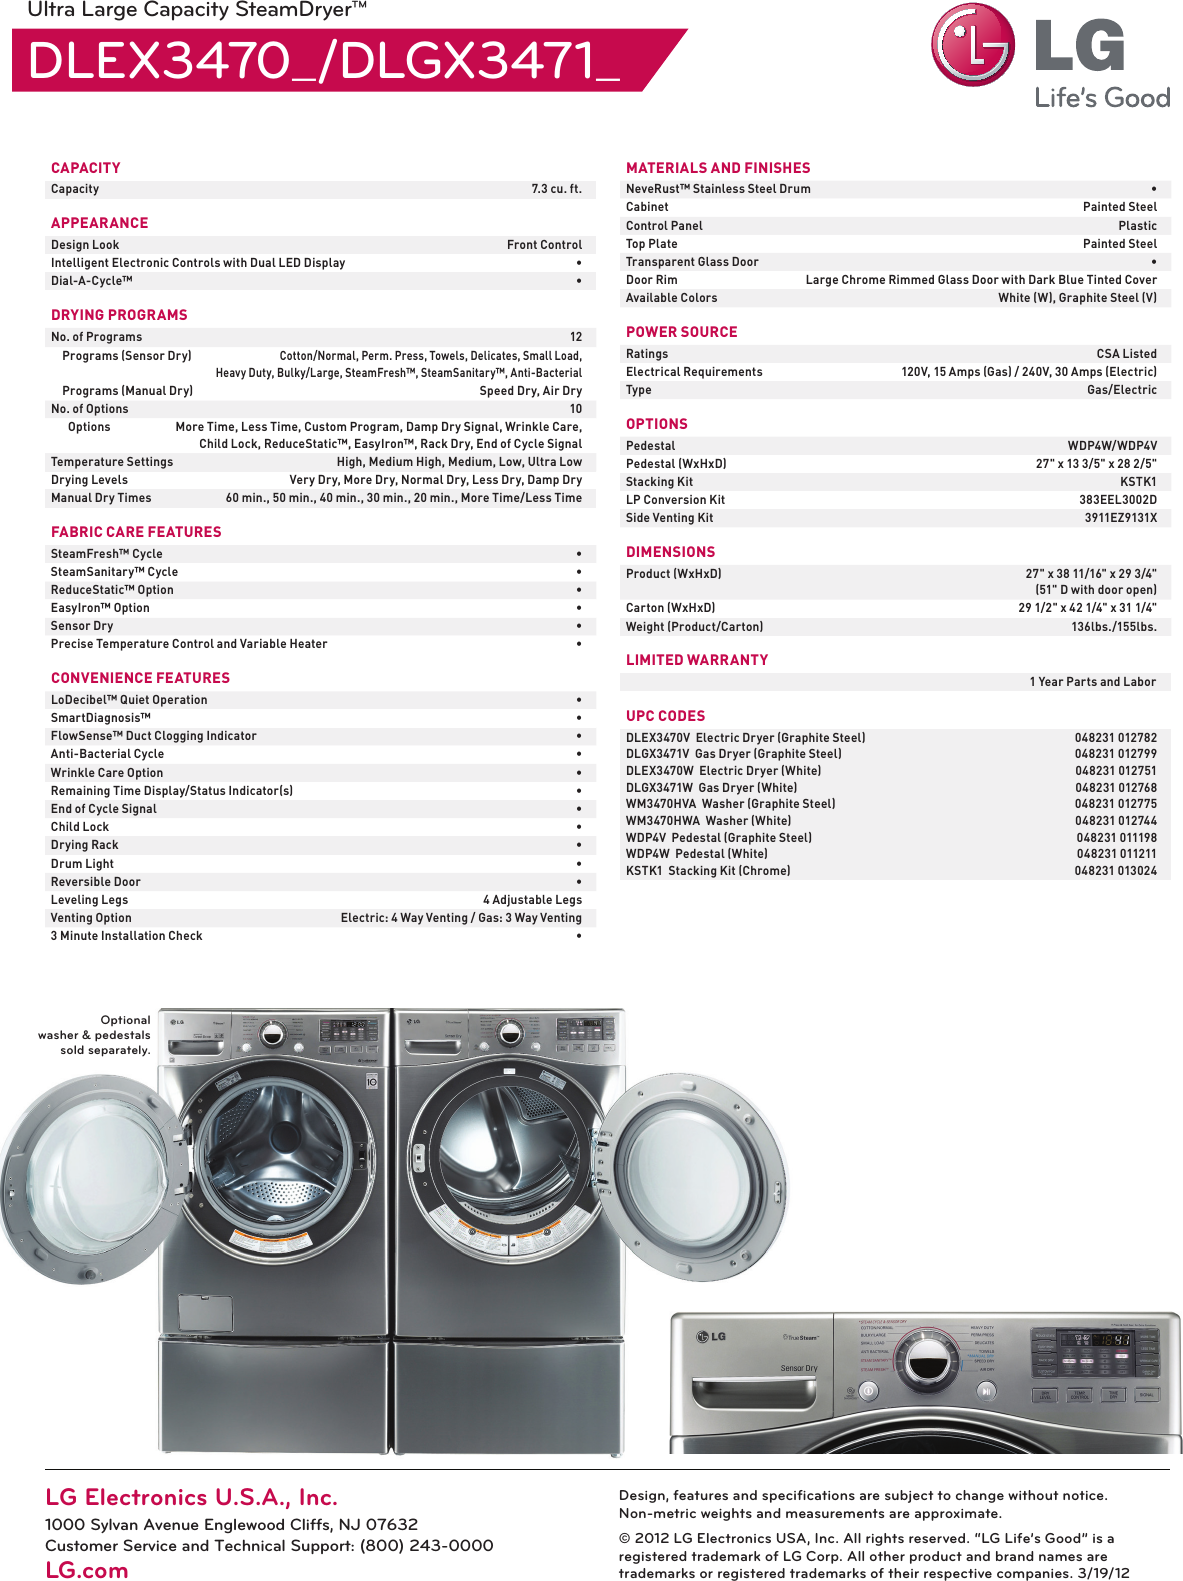 Page 2 of 2 - LG DLEX3470W User Manual Specification DLEX3470 DLGX3471 Dryer Spec Sheet